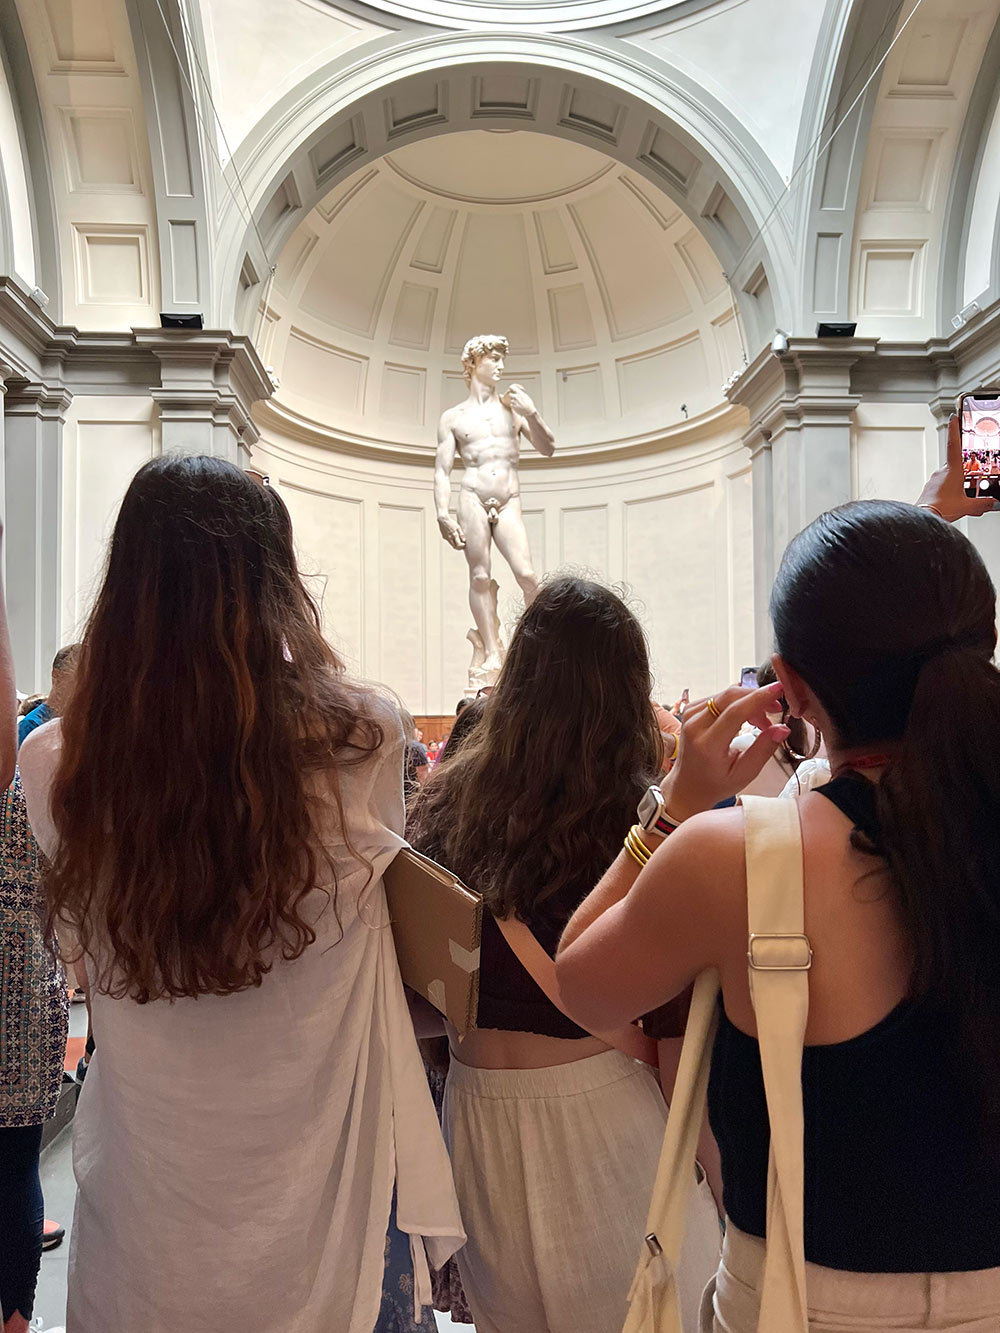 Department of Art students on a guided tour of the Accademia Gallery in Florence, Italy to view Renaissance paintings and sculptures including Michelangelo’s David.